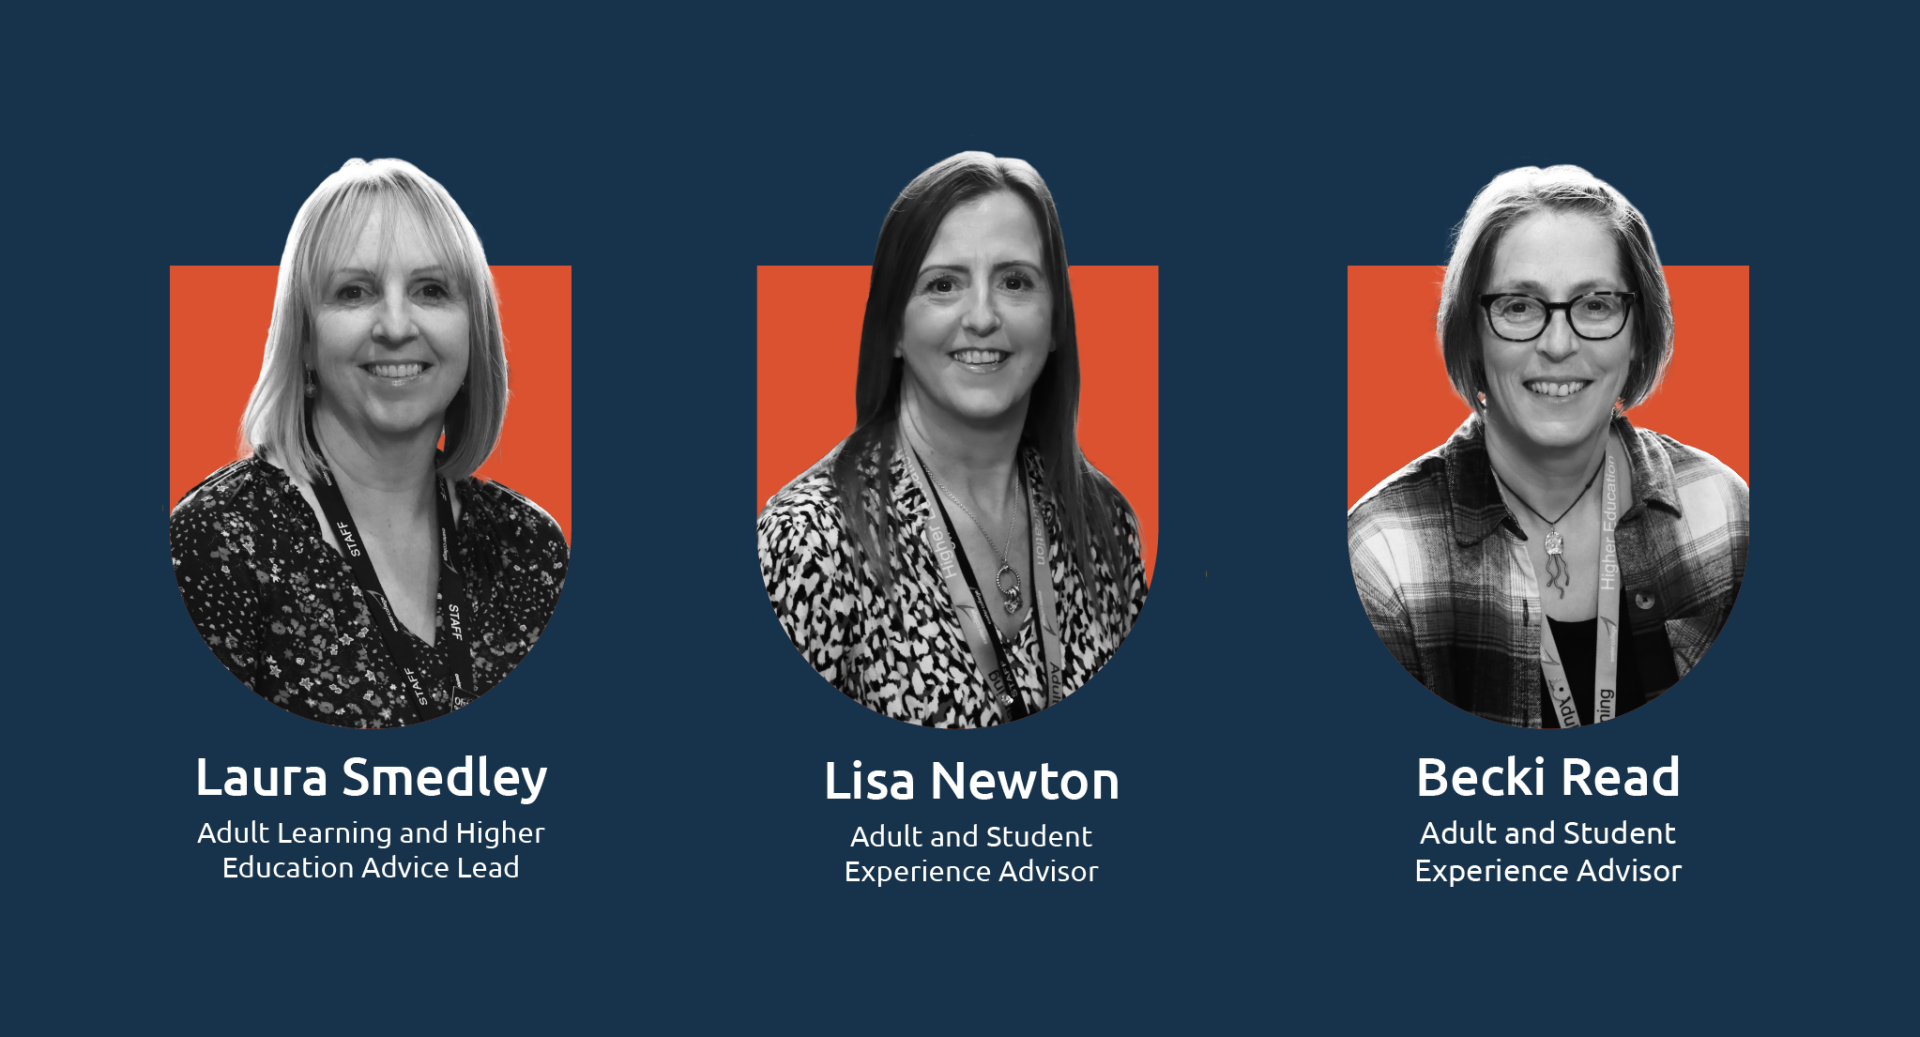 Meet the Adult Advice Team: Laura Smedley - Adult Learning and Higher Education Advice Lead, Lisa Newton – Adult and Student Experience Advisor, Becki Read – Adult and Student Experience Advisor